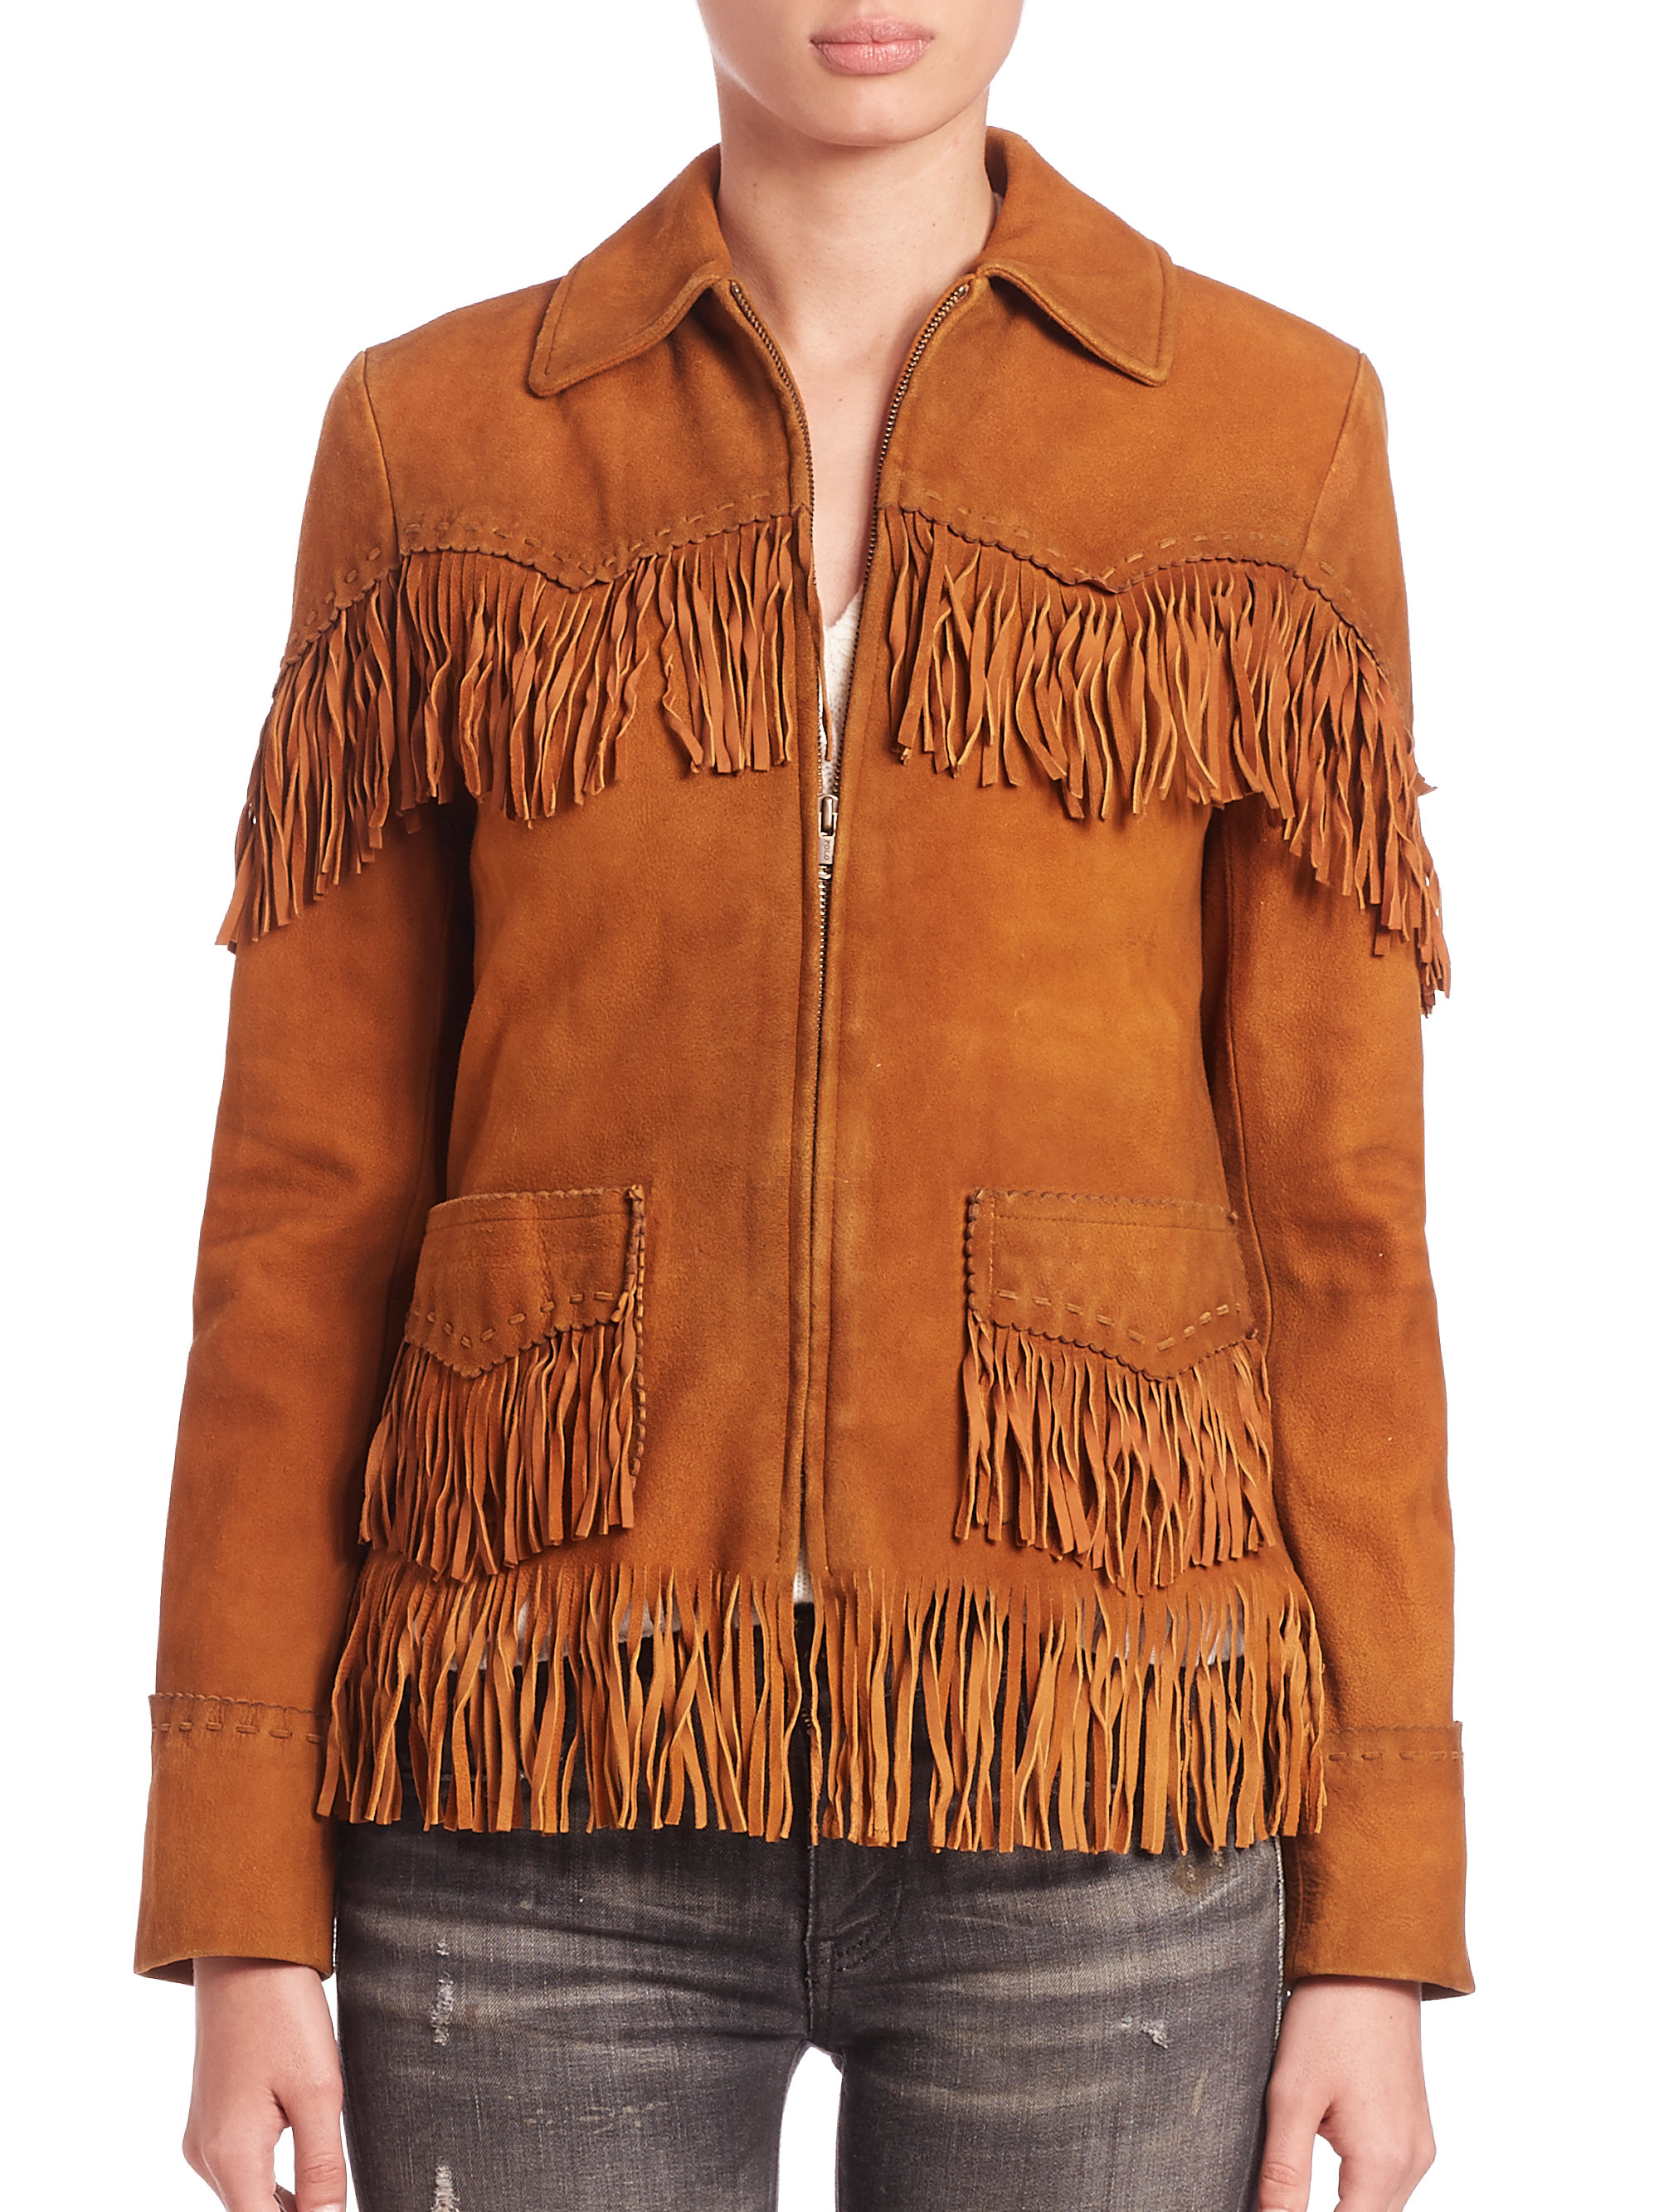 Polo Ralph Lauren Fringed Suede Jacket 